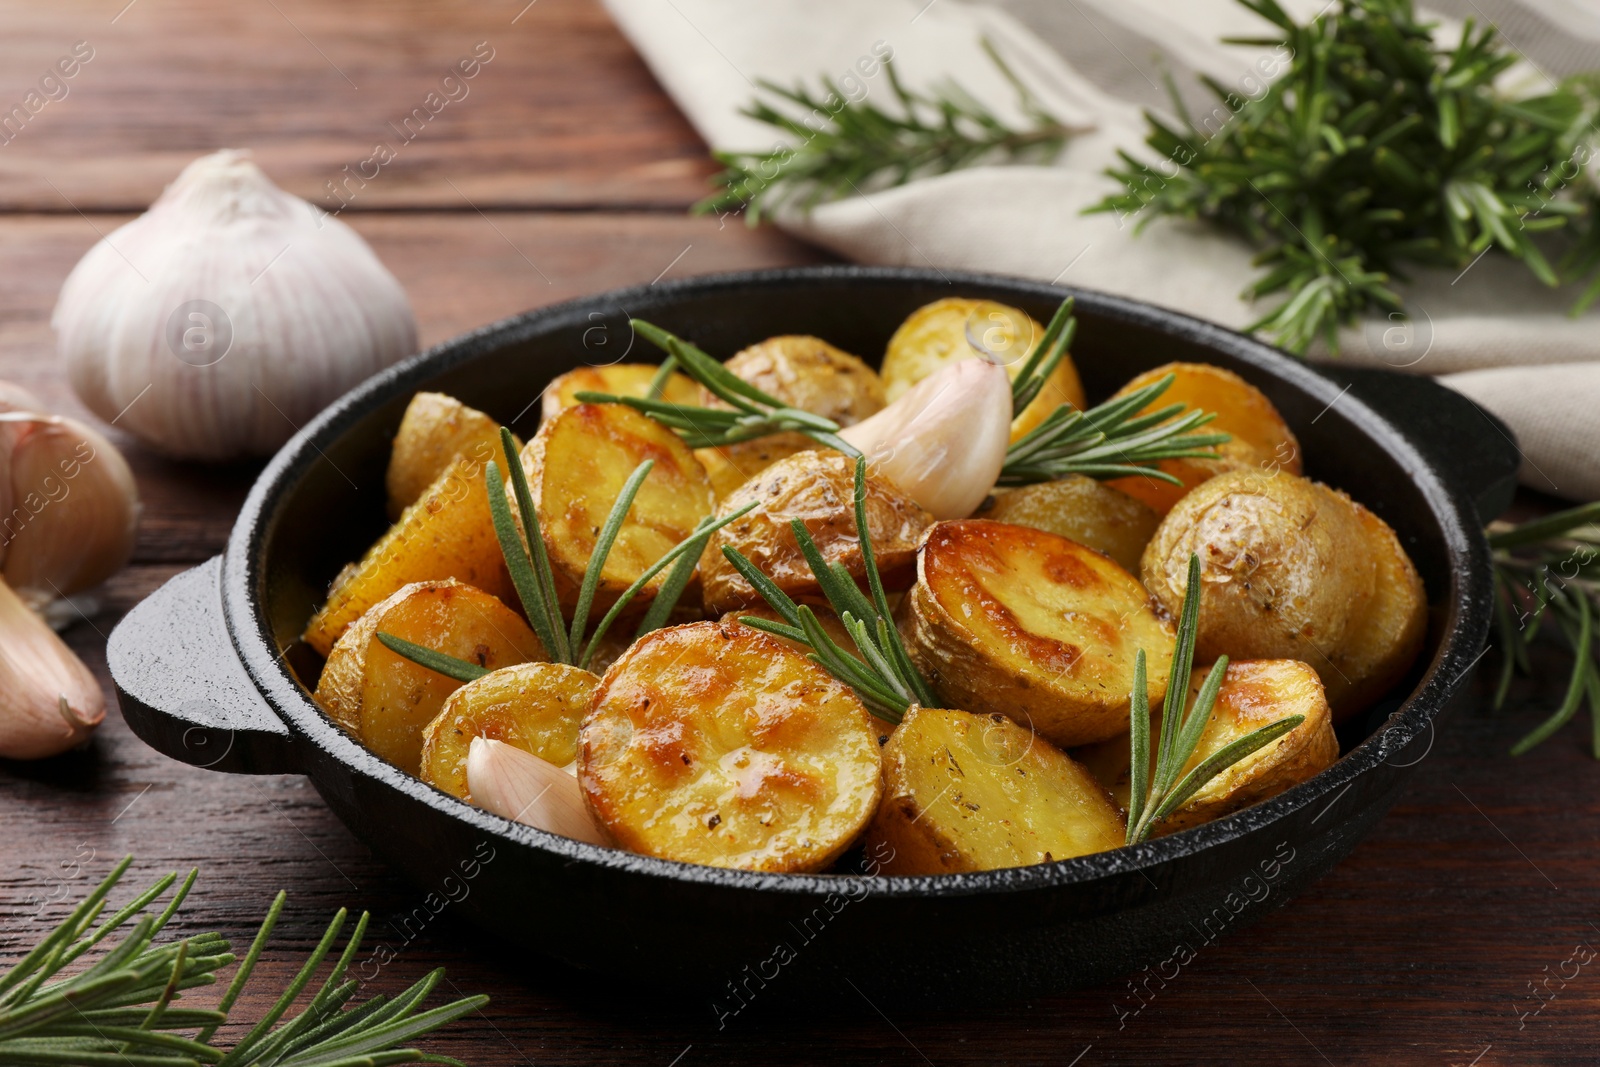 Photo of Delicious baked potatoes with rosemary in frying pan on table